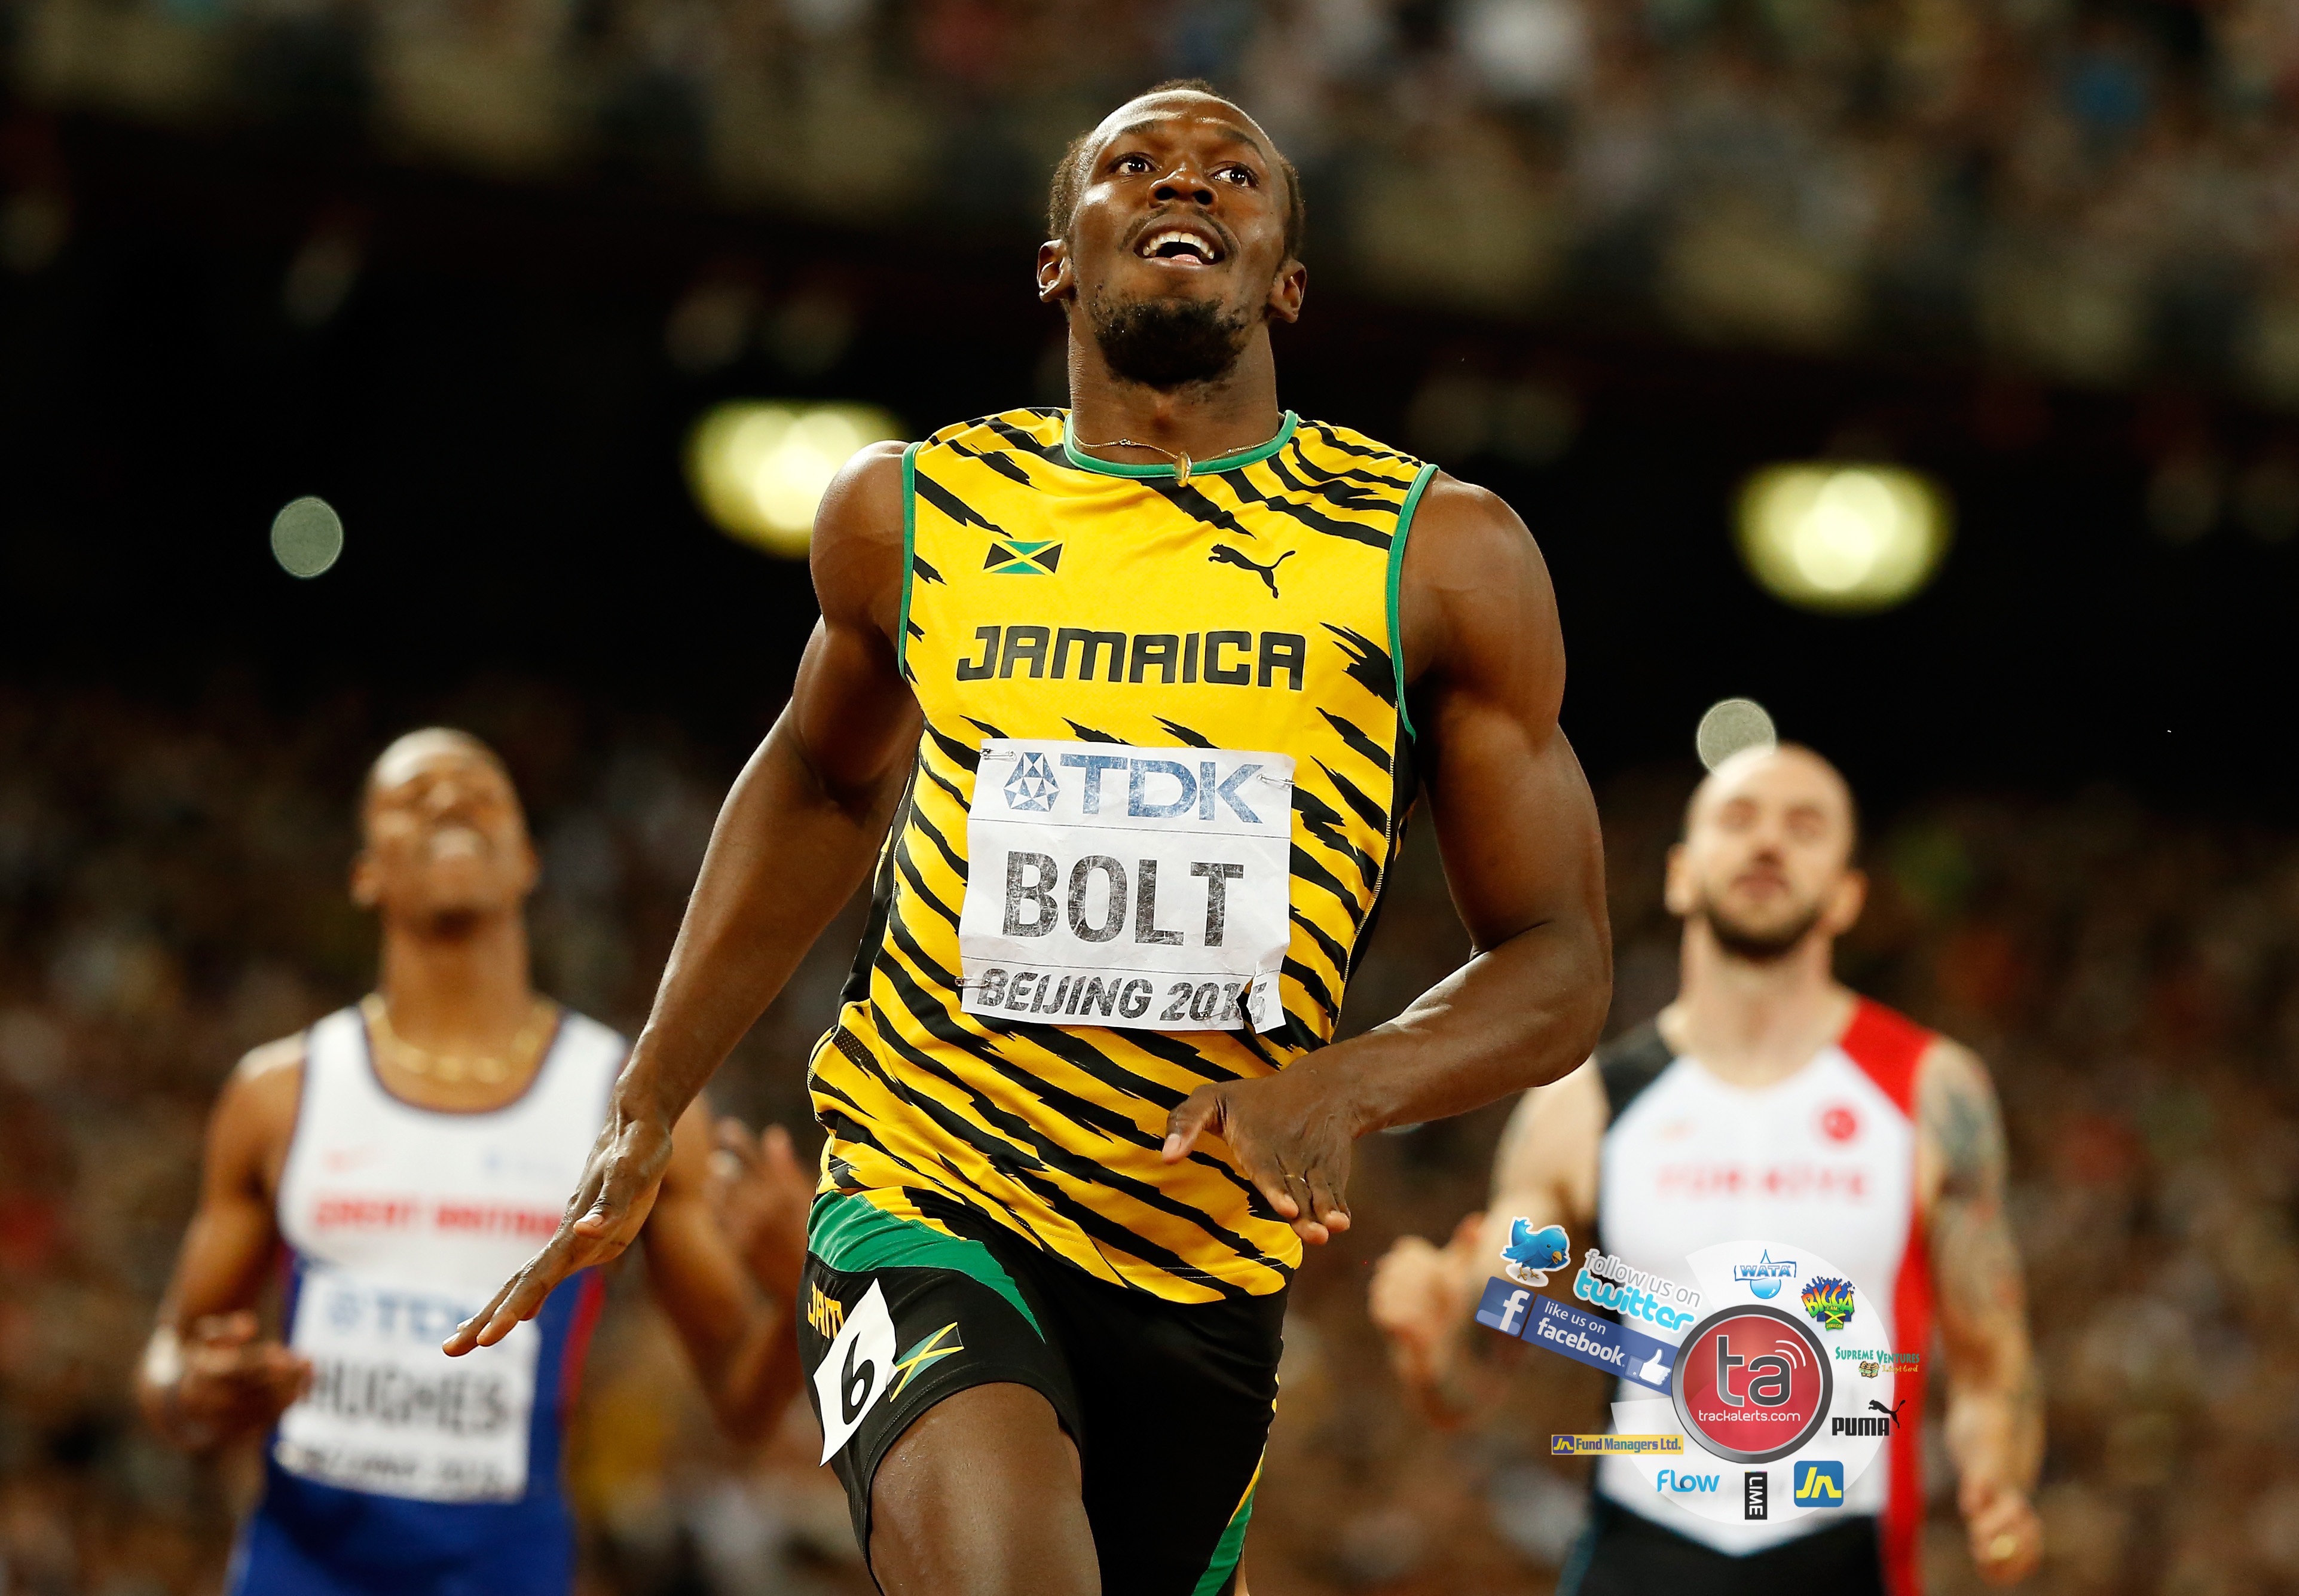 Linford Christie says Bolt is great because he ‘trains the old way’